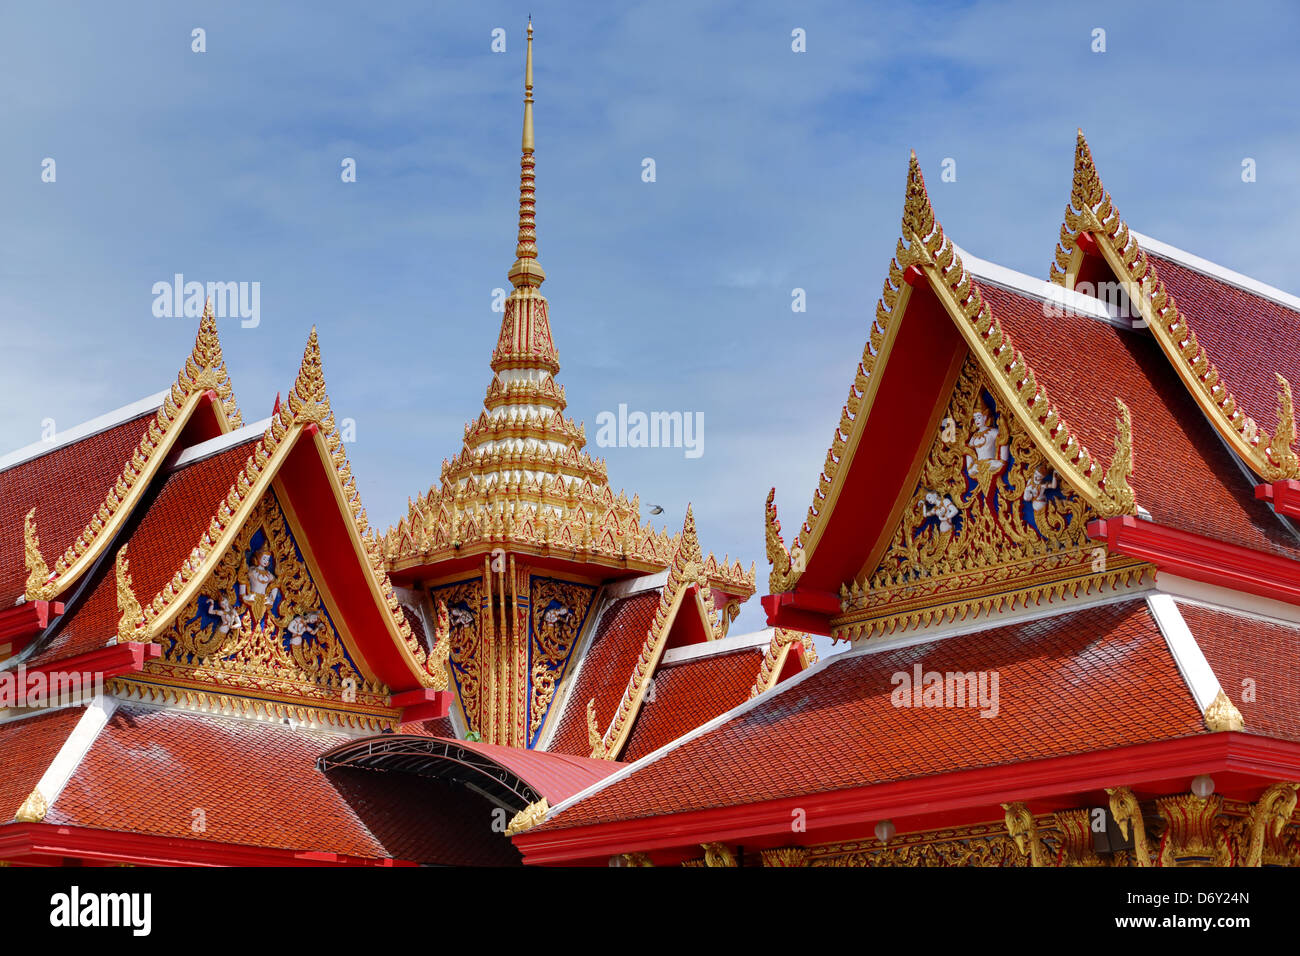 Thai big temple with red roof tiles Stock Photo